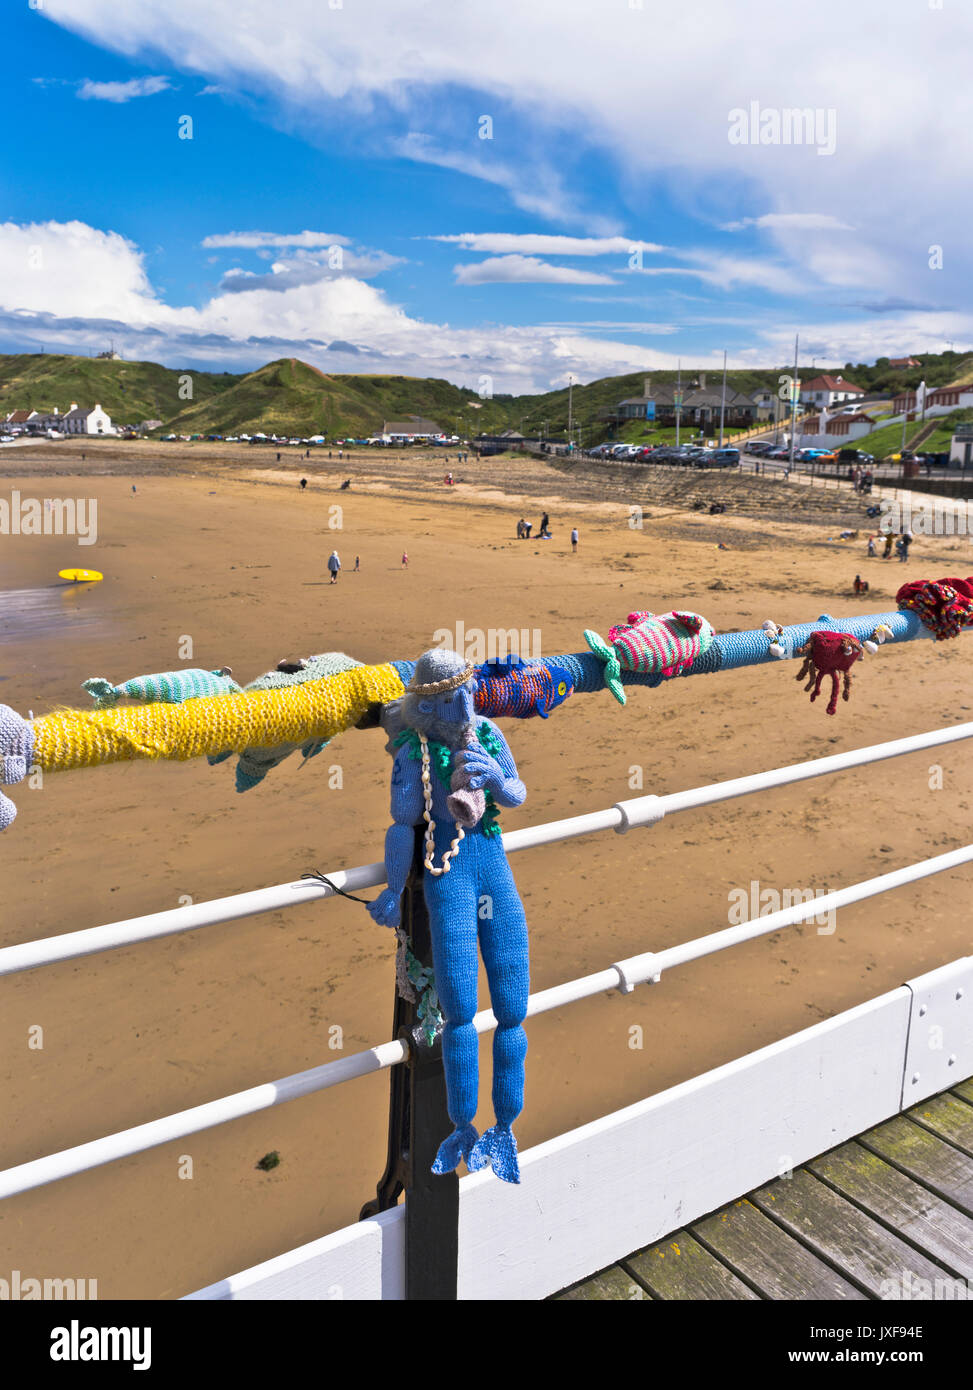 dh Yarn storming pier SALTBURN BY THE SEA CLEVELAND Knitted sea figures Neptune crochet bombing guerilla knitting art knit urban Stock Photo